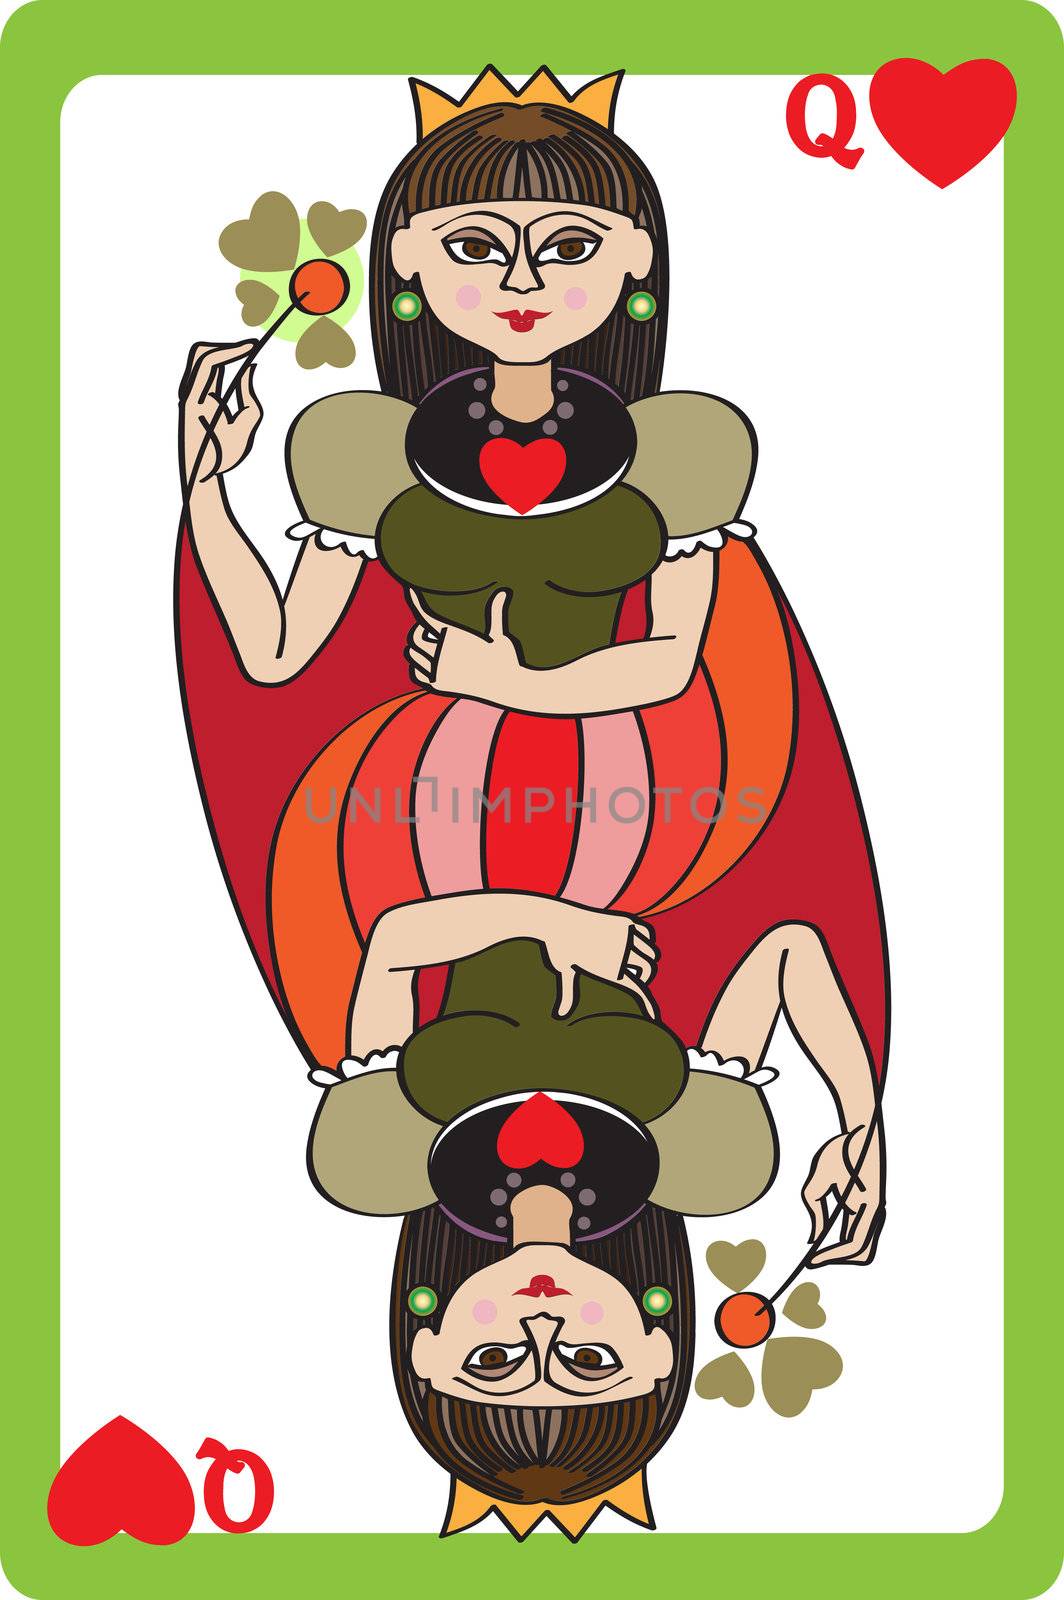 Scale hand drawn illustration of a playing card representing the queen of hearts, an element of a deck